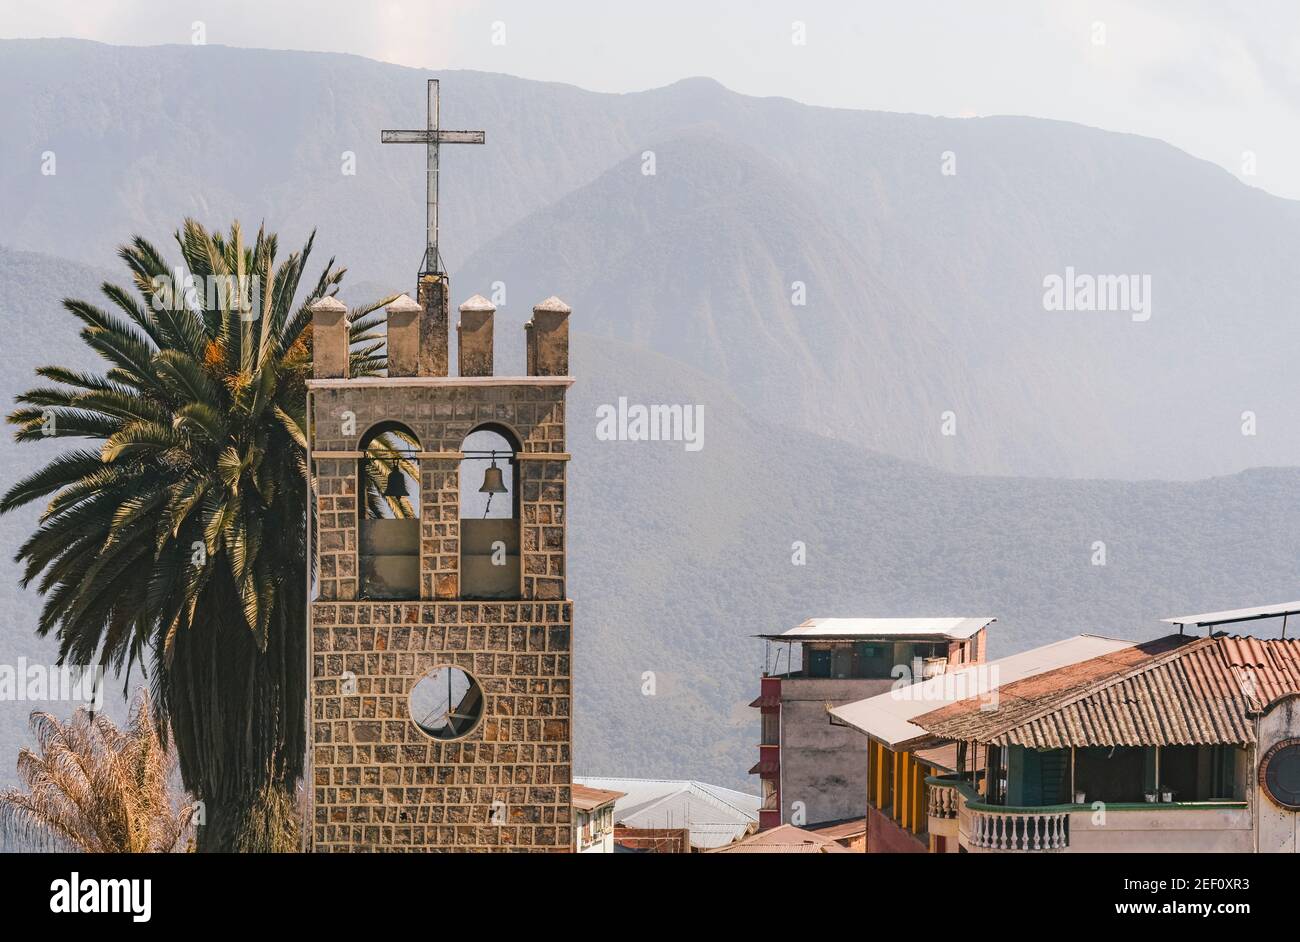 Church tower with palms and mountains in the background, in the downtown of Coroico, Bolivia. This tower is part o Stock Photo